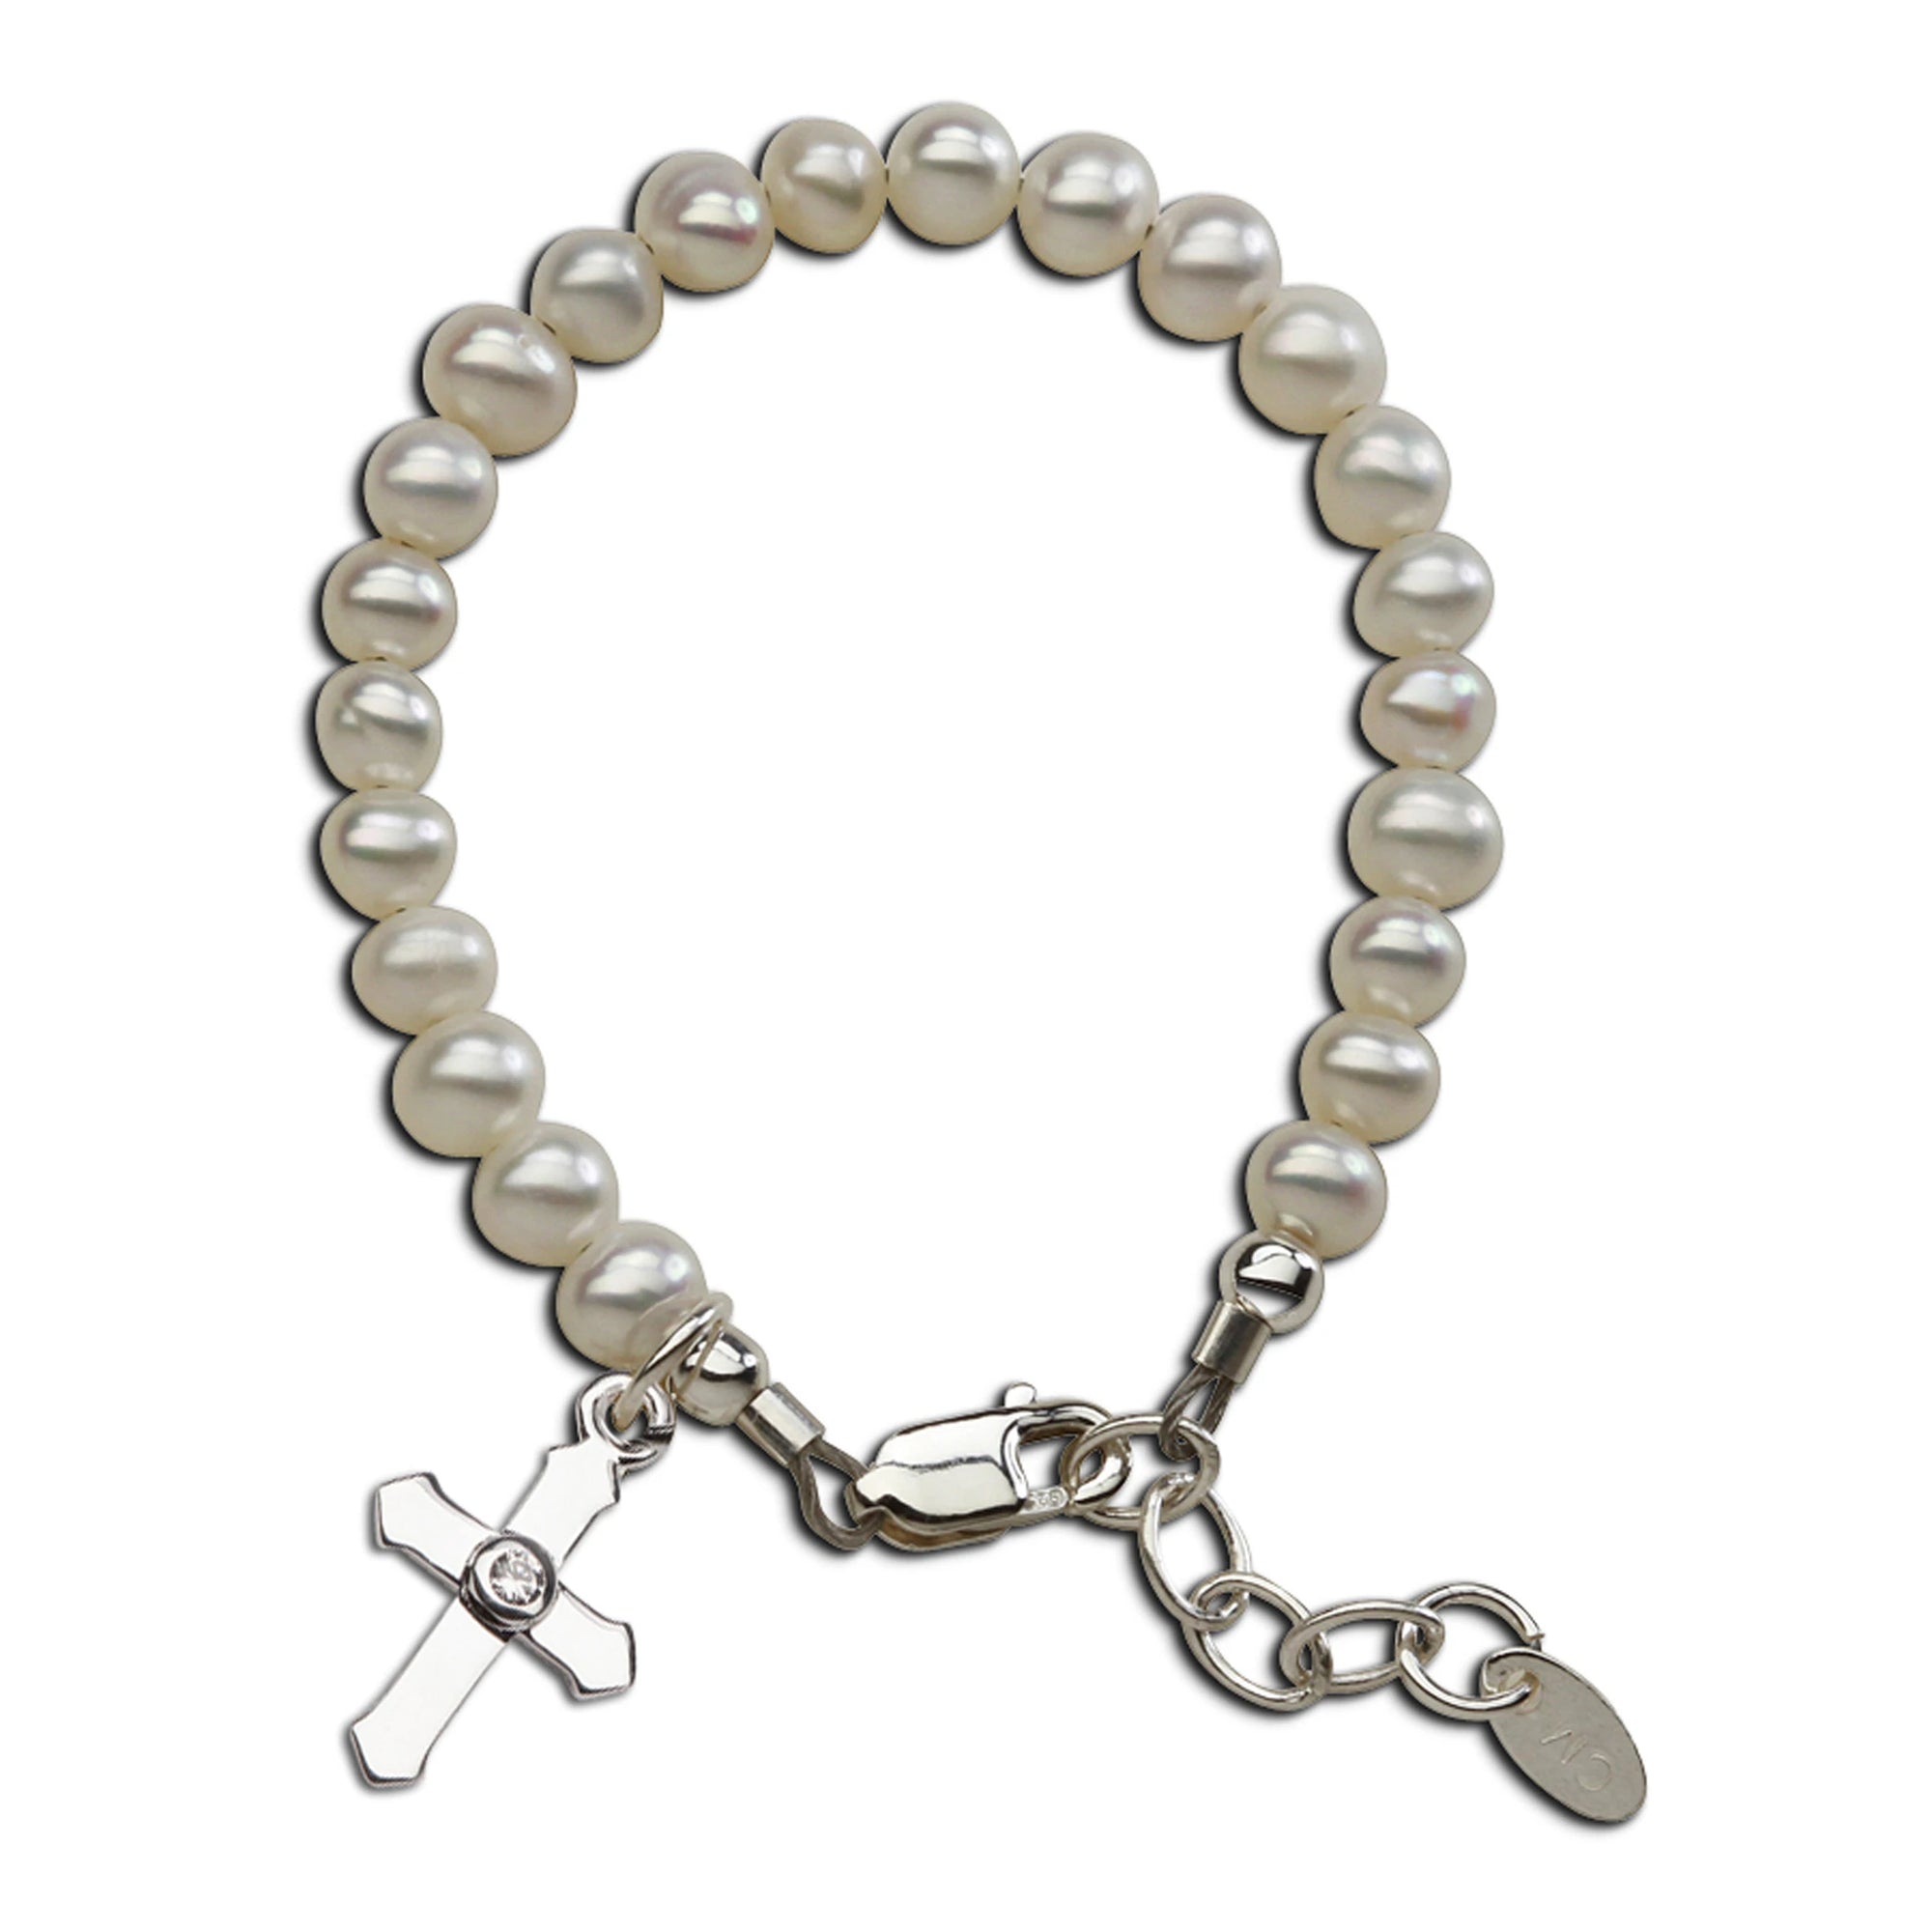 Cherished Moments Lacey Sterling Silver Bracelet with Pearls & Cross